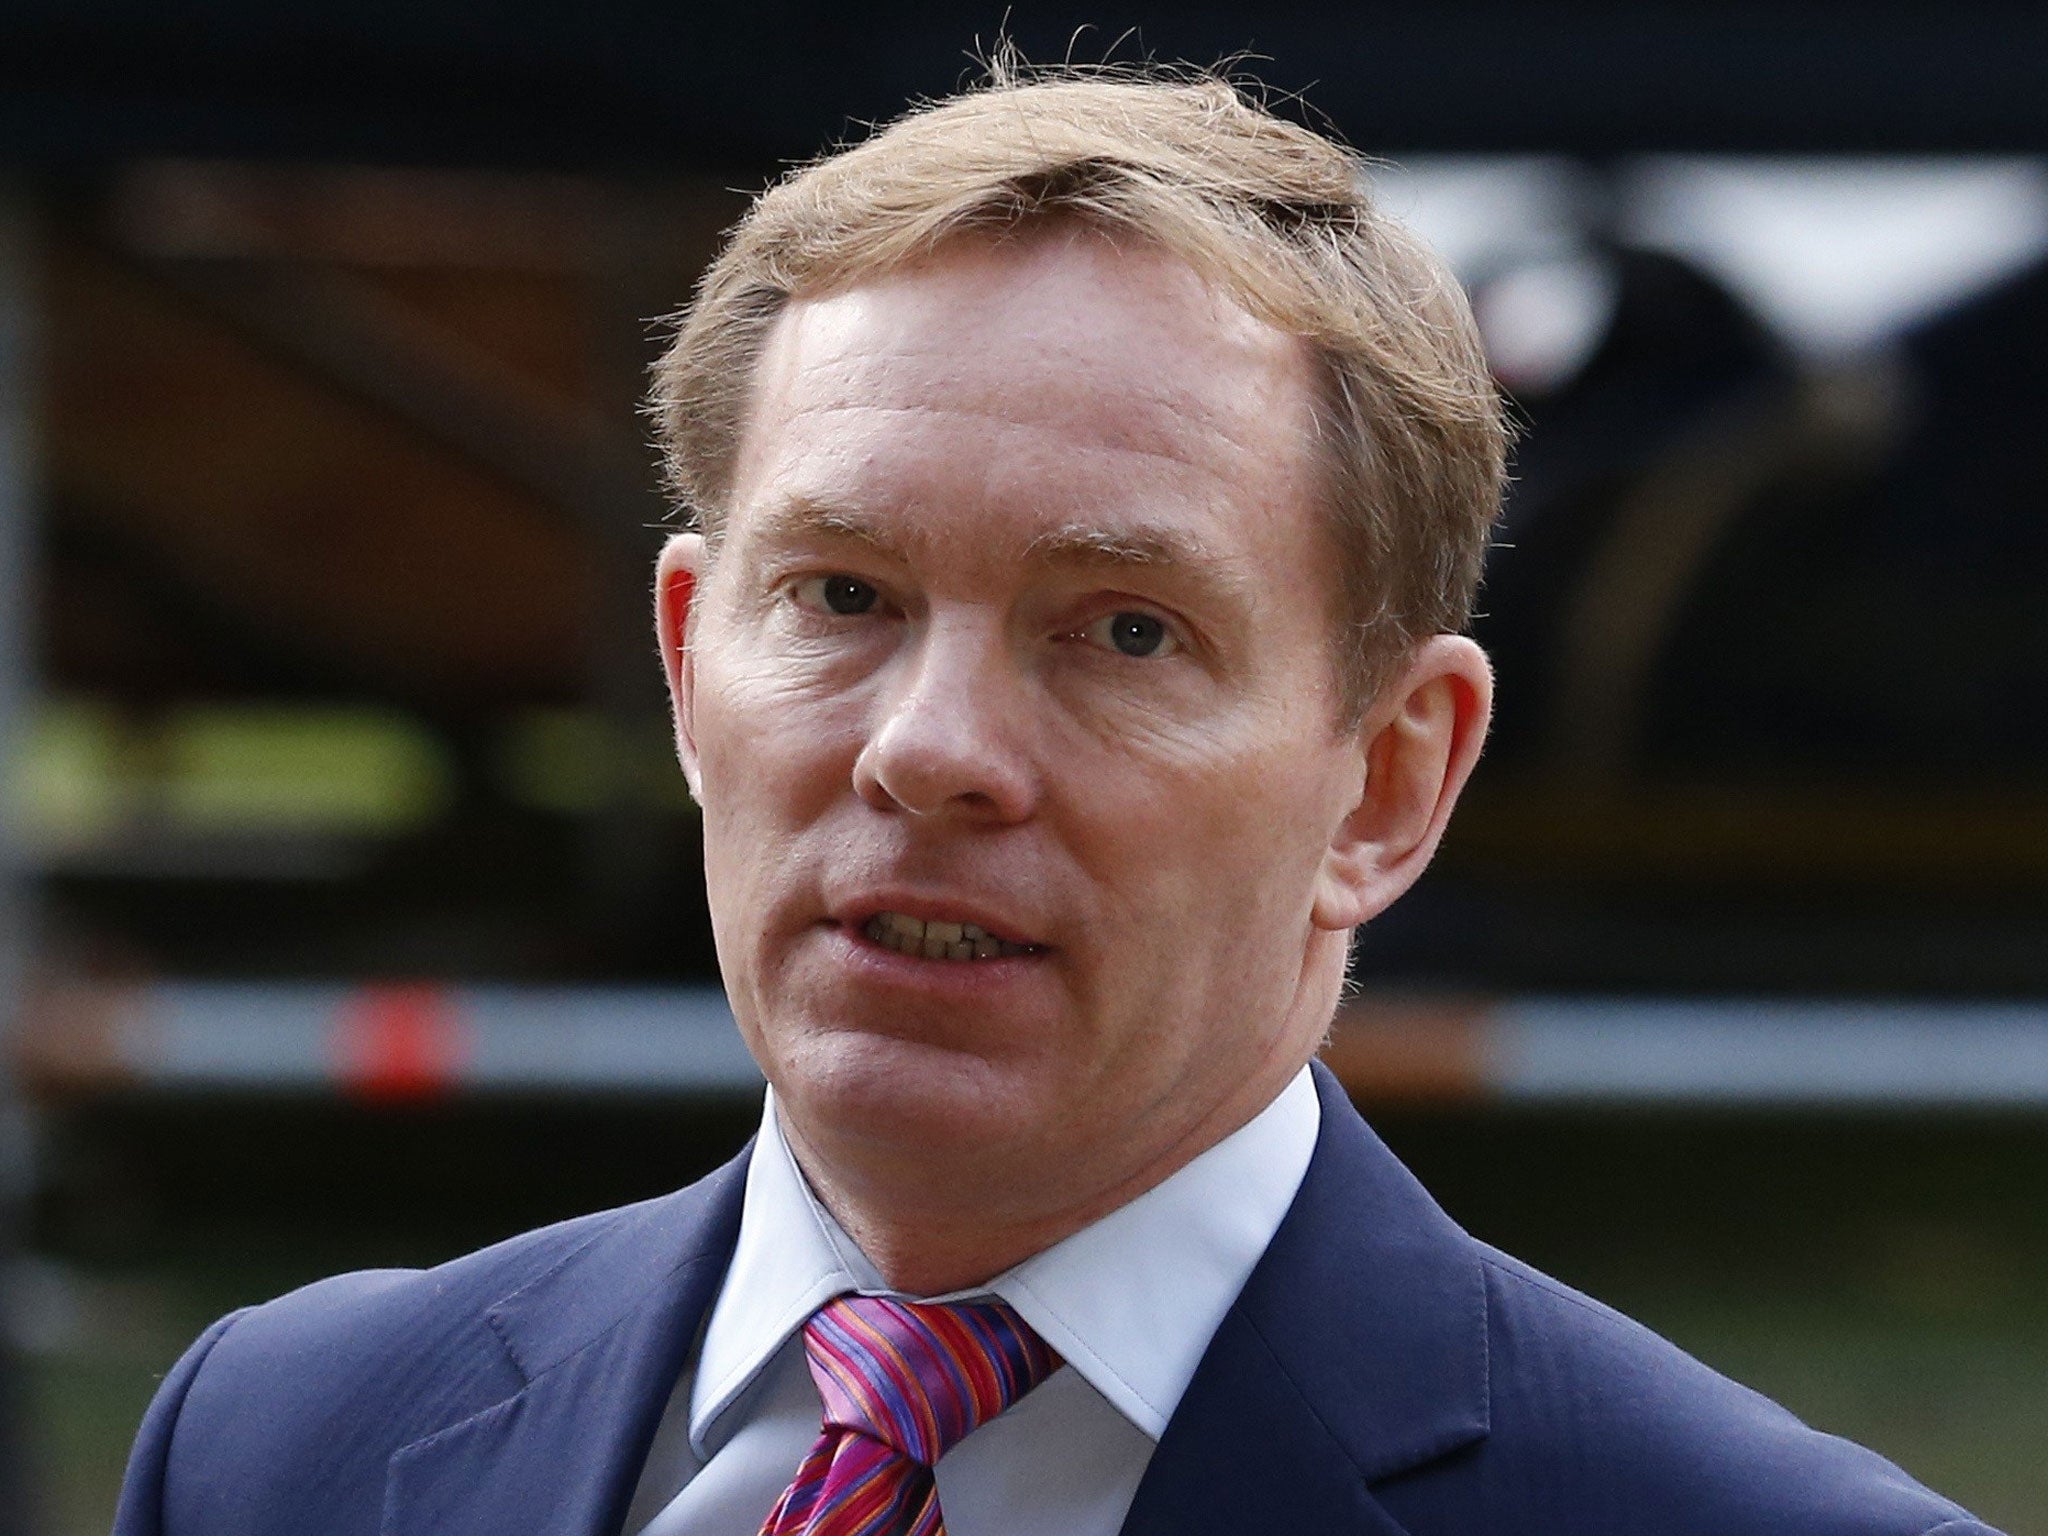 Labour MP Chris Bryant made the complaint about the leaflet, which was delivered to thousands of homes